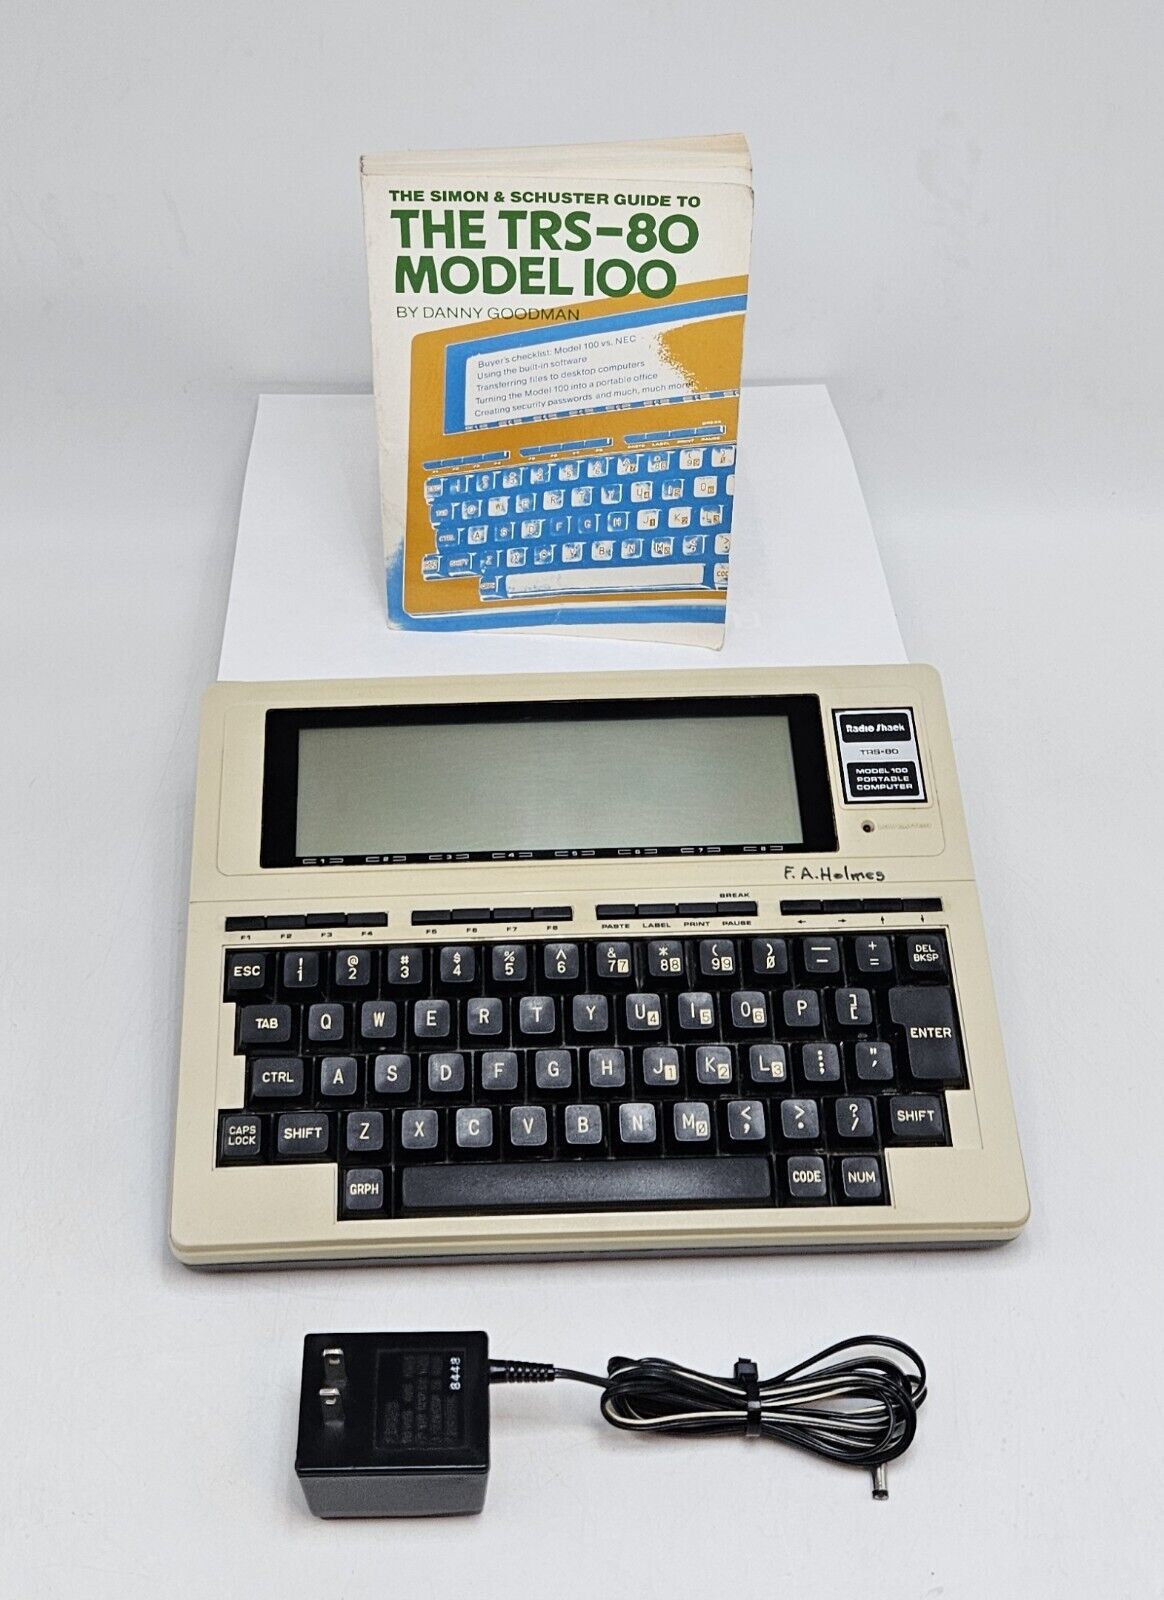 Radio Shack TRS-80 Model 100 Portable Computer Tested 